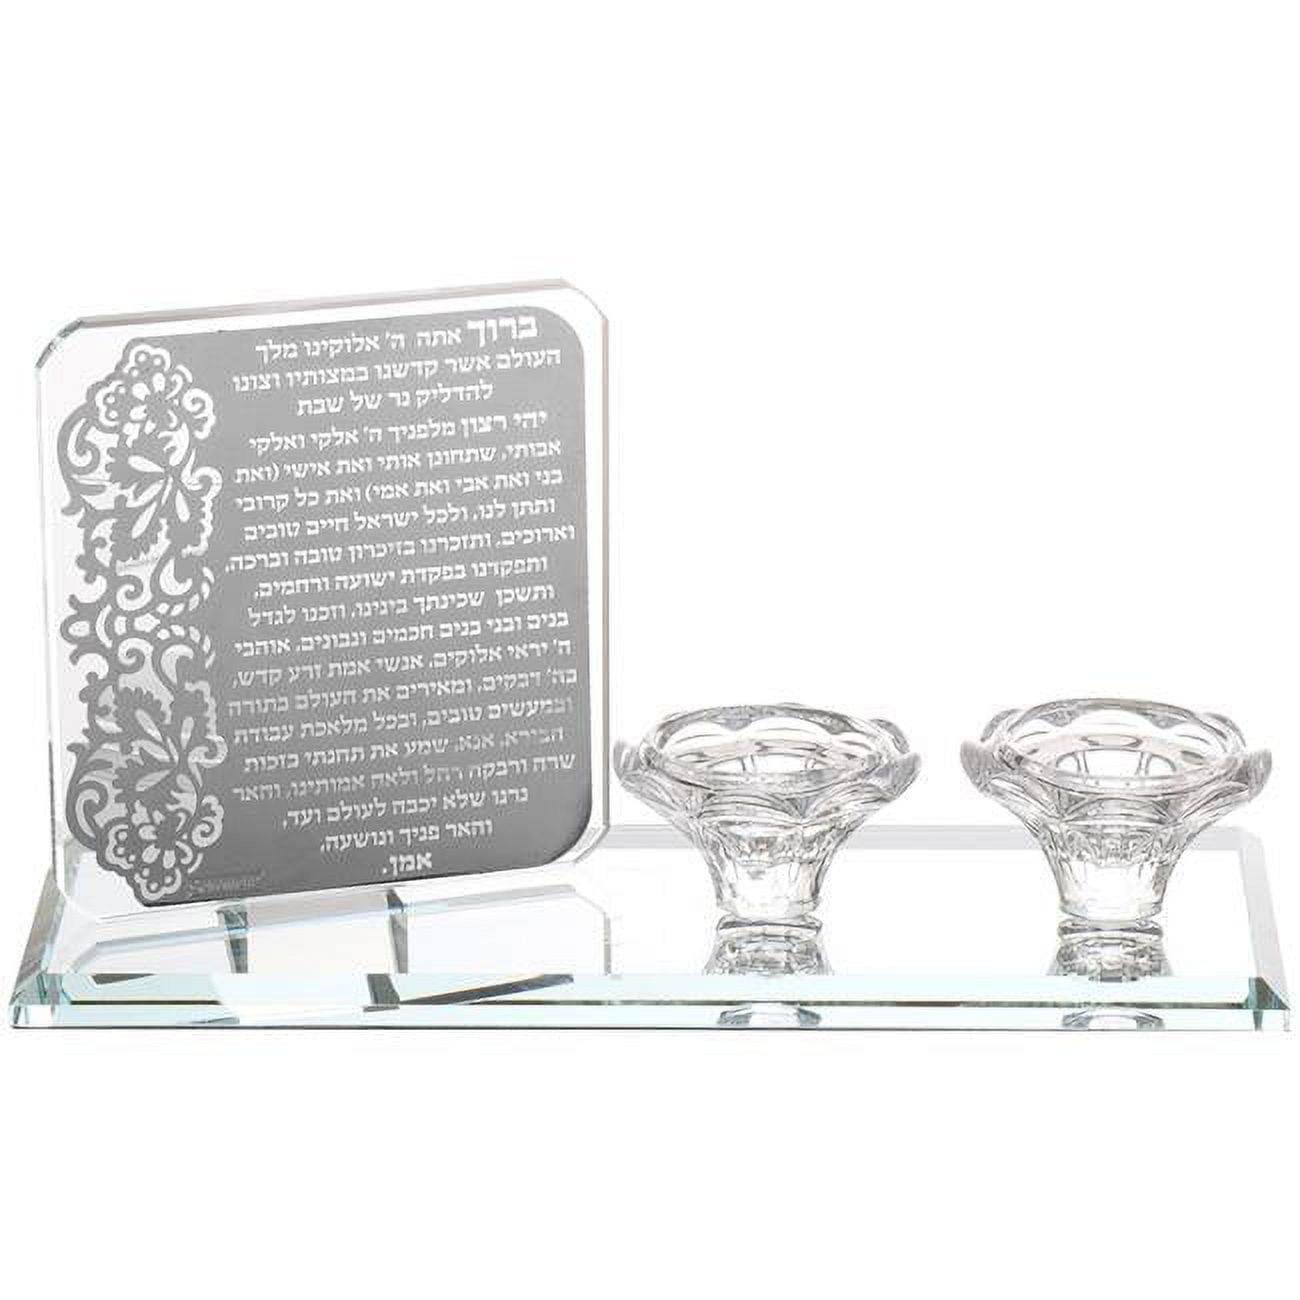 Picture of Schonfeld Collection 16441 Crystal Candle Holder with Hadlakat Neroth Prayer